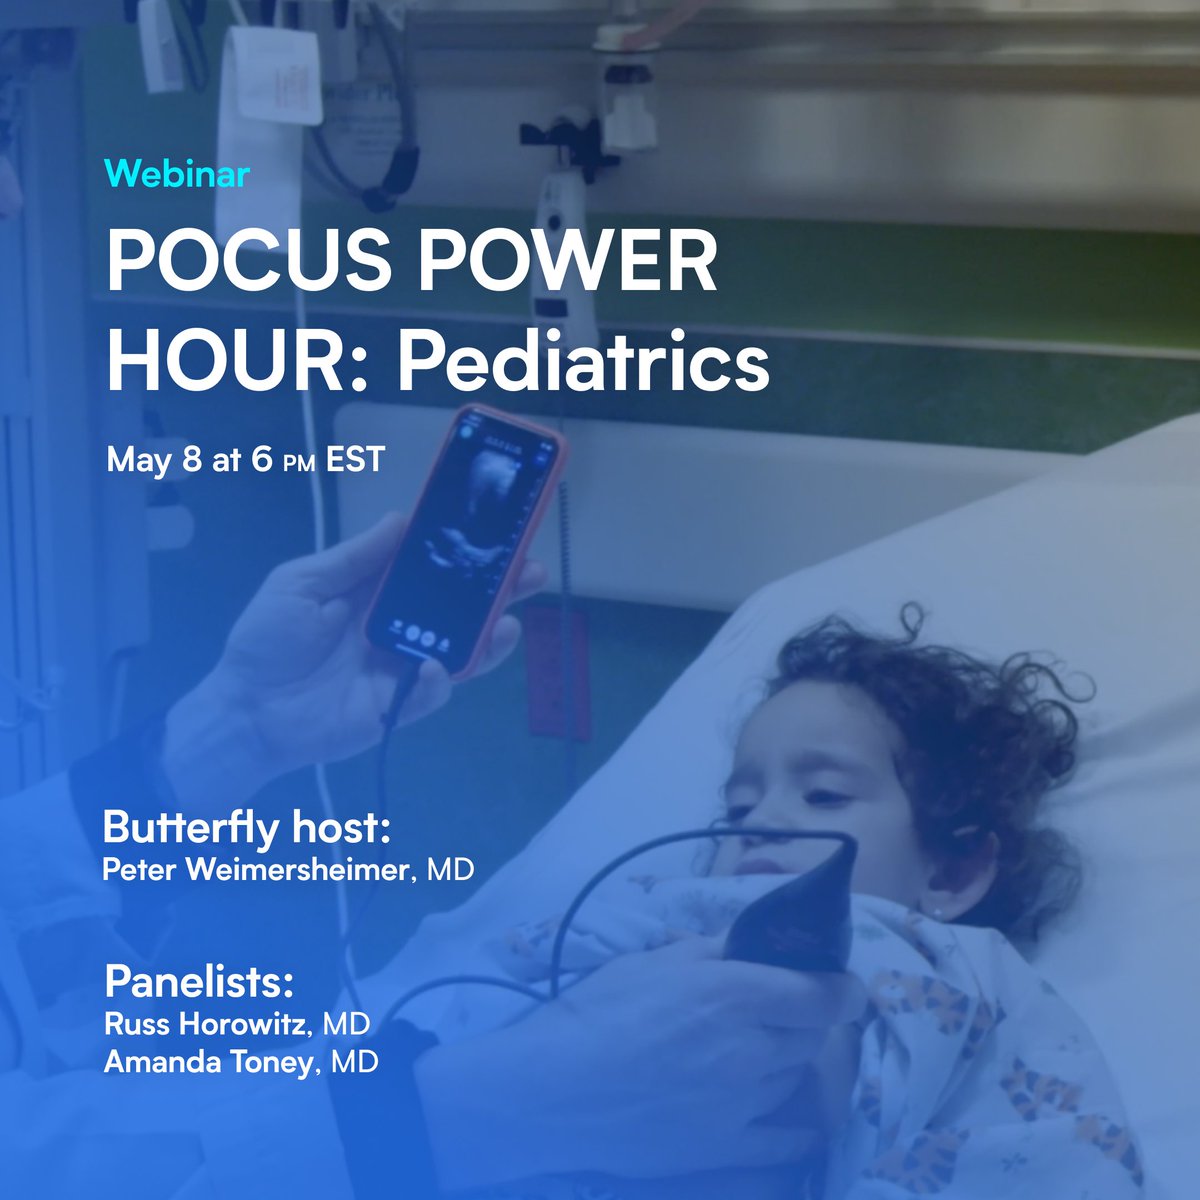 Join us 5/8 at 6pm EST for our webinar POCUS Power Hour: Pediatrics with Peds POCUS experts Dr. Amanda Toney & Dr. Russ Horowitz. Kids are more sensitive to radiation, making POCUS the perfect technology. Register here: bit.ly/3wdgtKu #pocus #diagnosis #ultrasound